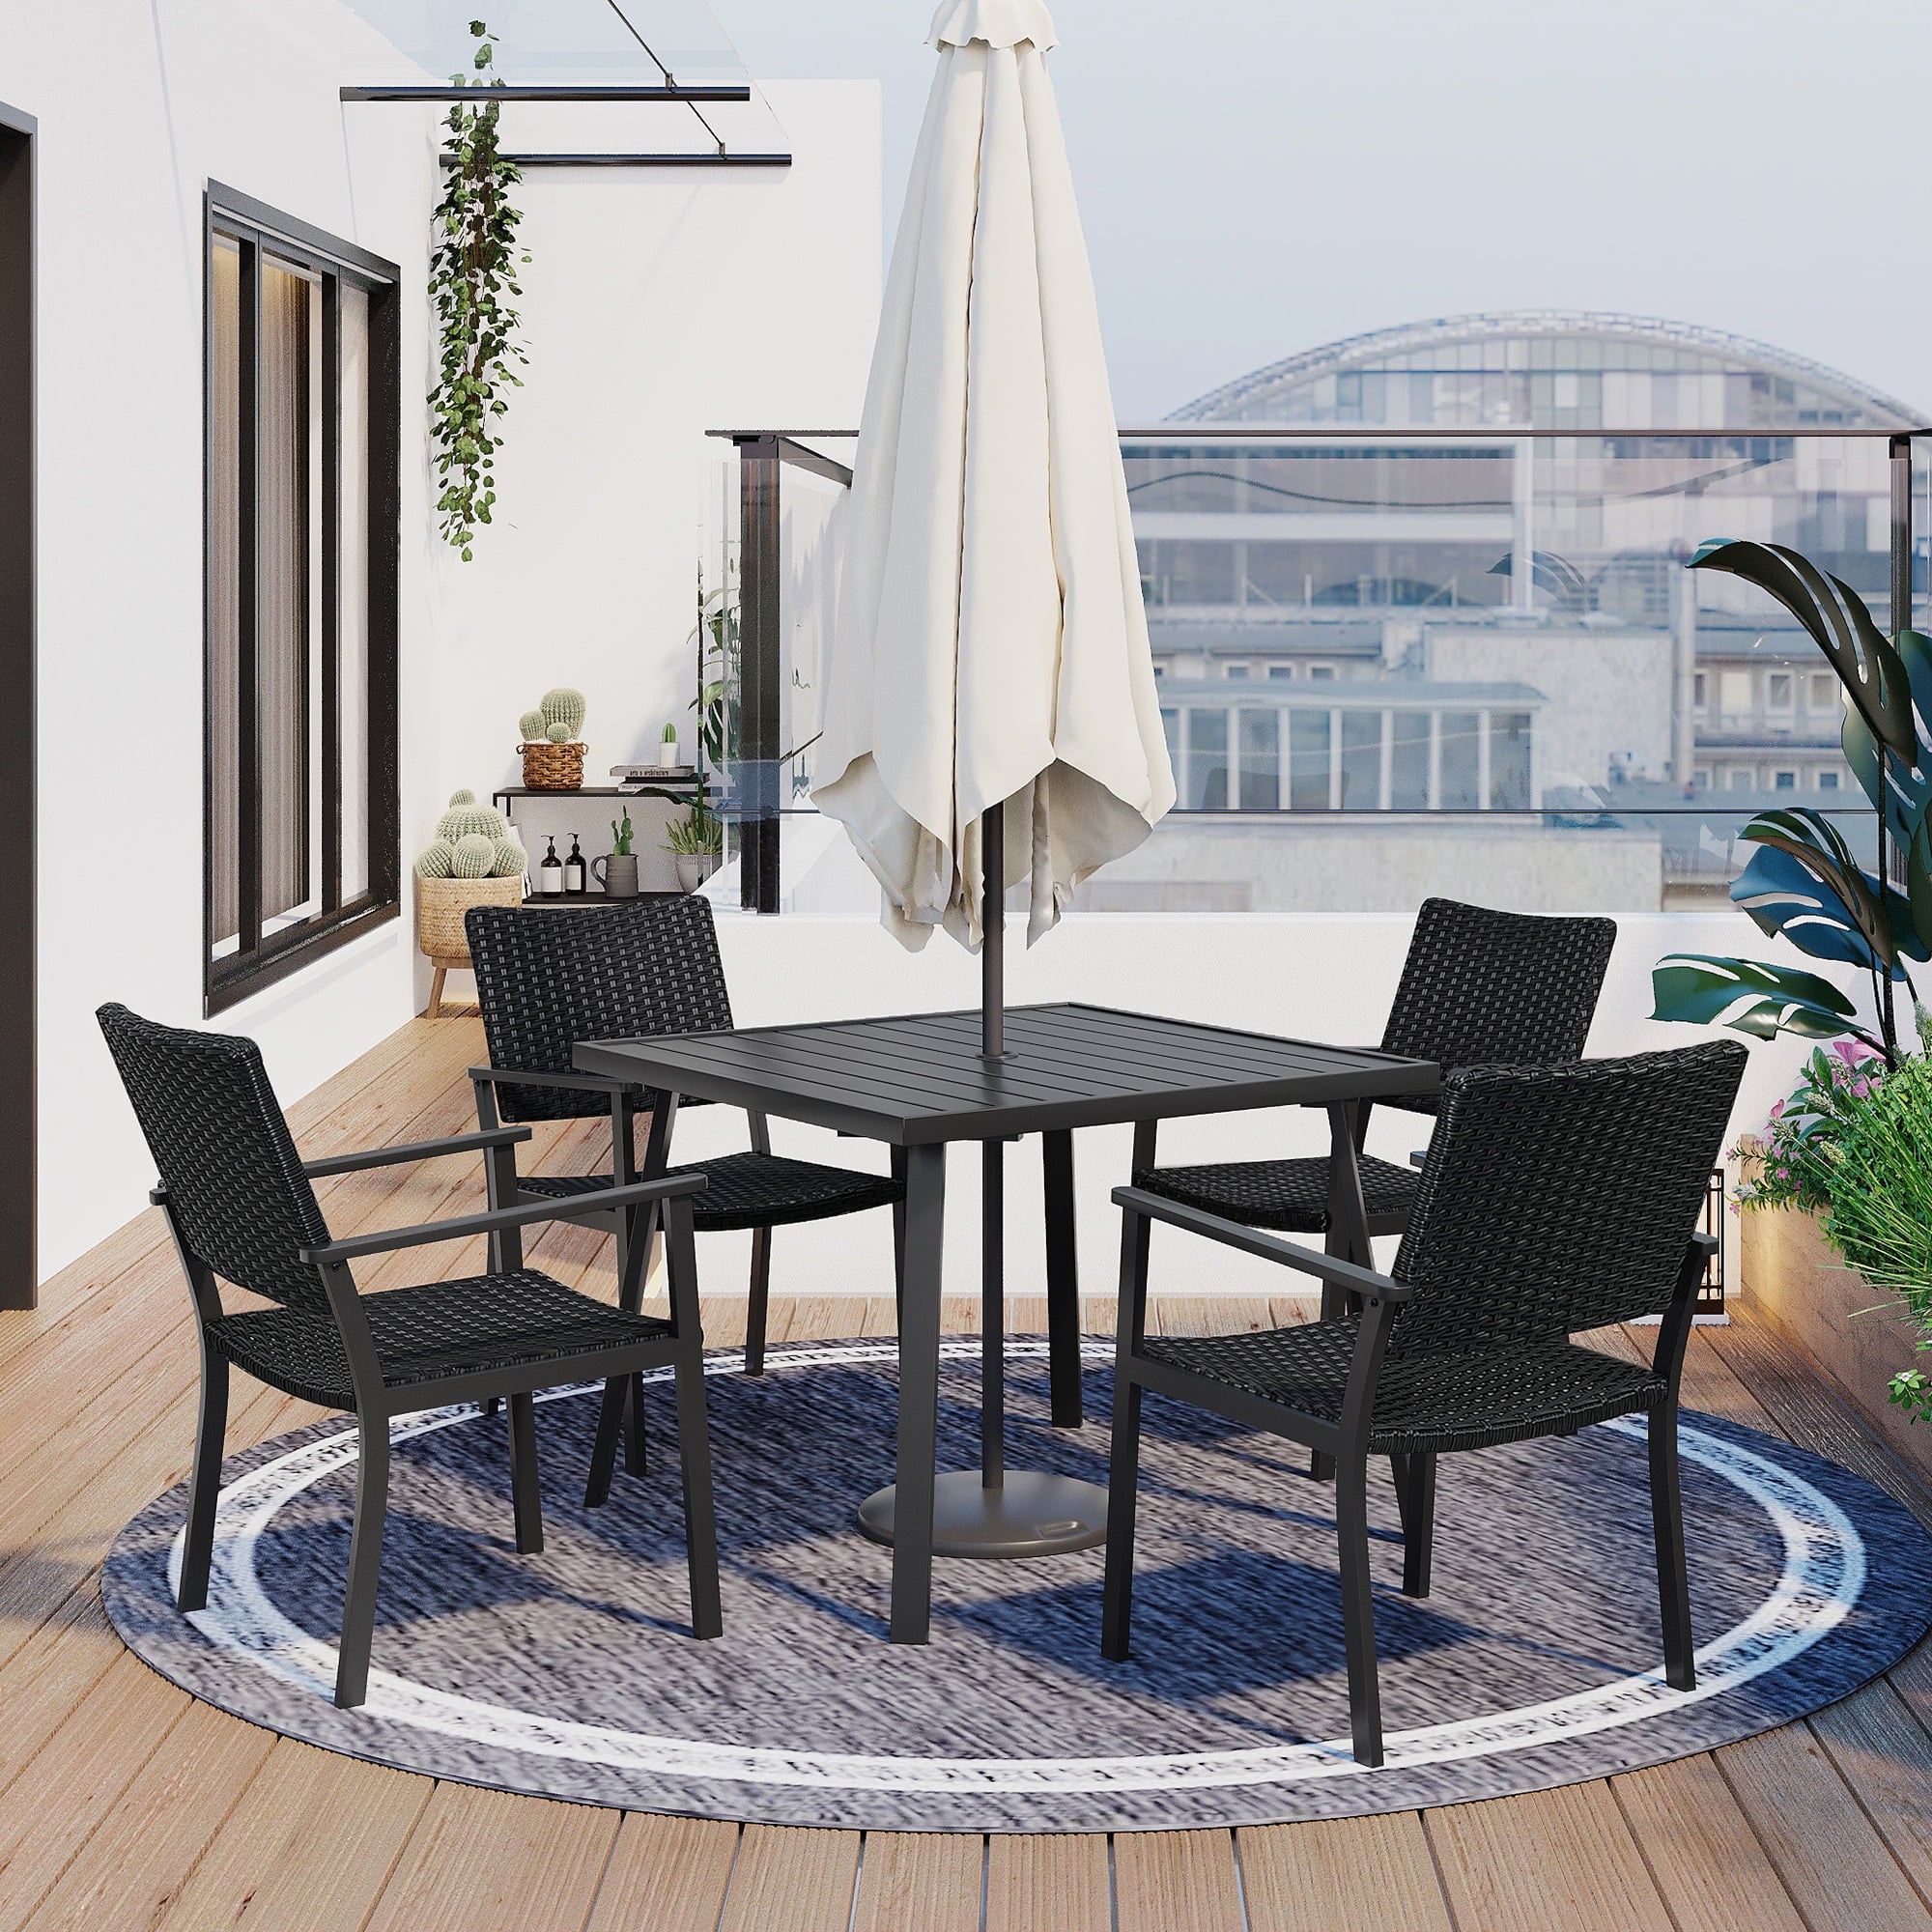 5 Piece Patio Dining Set, BTMWAY PE Rattan Patio Table and Chairs Sets with Umbrella Hole Table and 4 Dining Chairs, Outdoor Patio Bistro Sets for Backyard Garden Balcony, Black Wicker